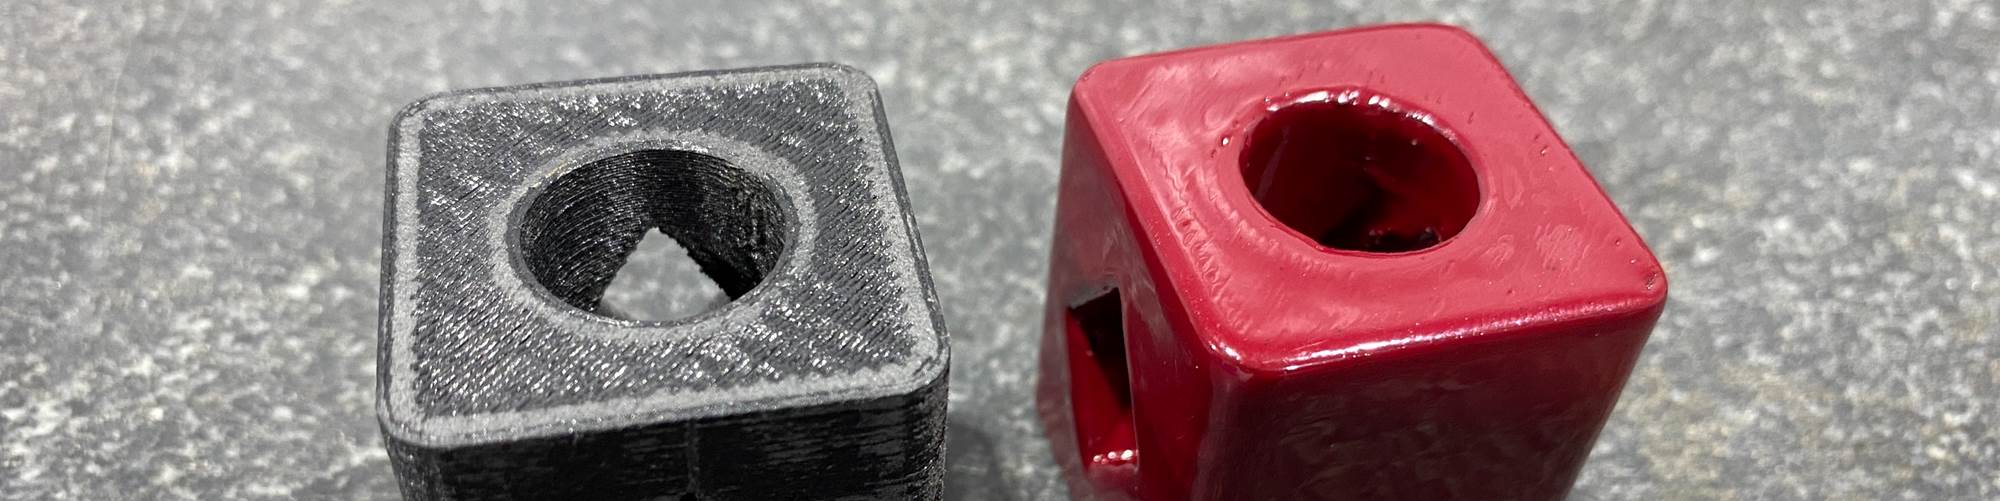 Can Metal Parts Be Replaced With 3D Printed | Additive